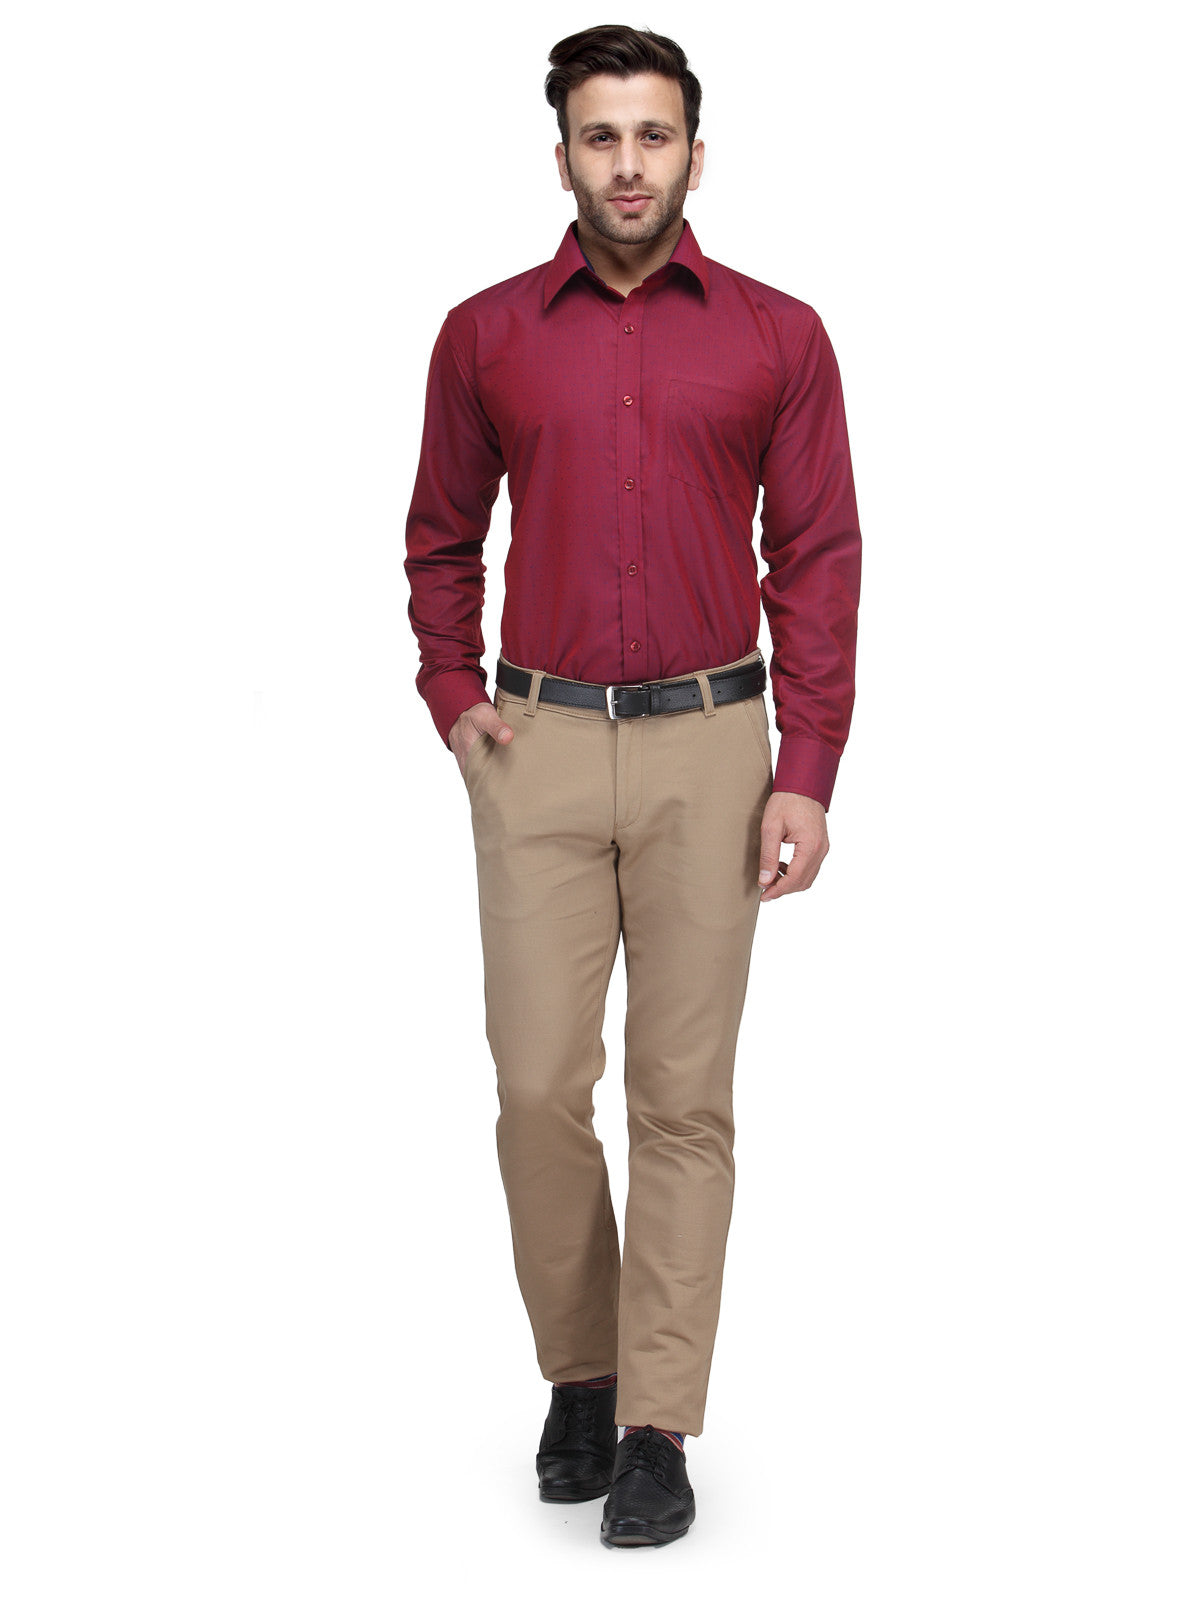 Burgundy Pants with Brown Shoes Casual Fall Outfits For Men In Their 30s (4  ideas & outfits) | Lookastic